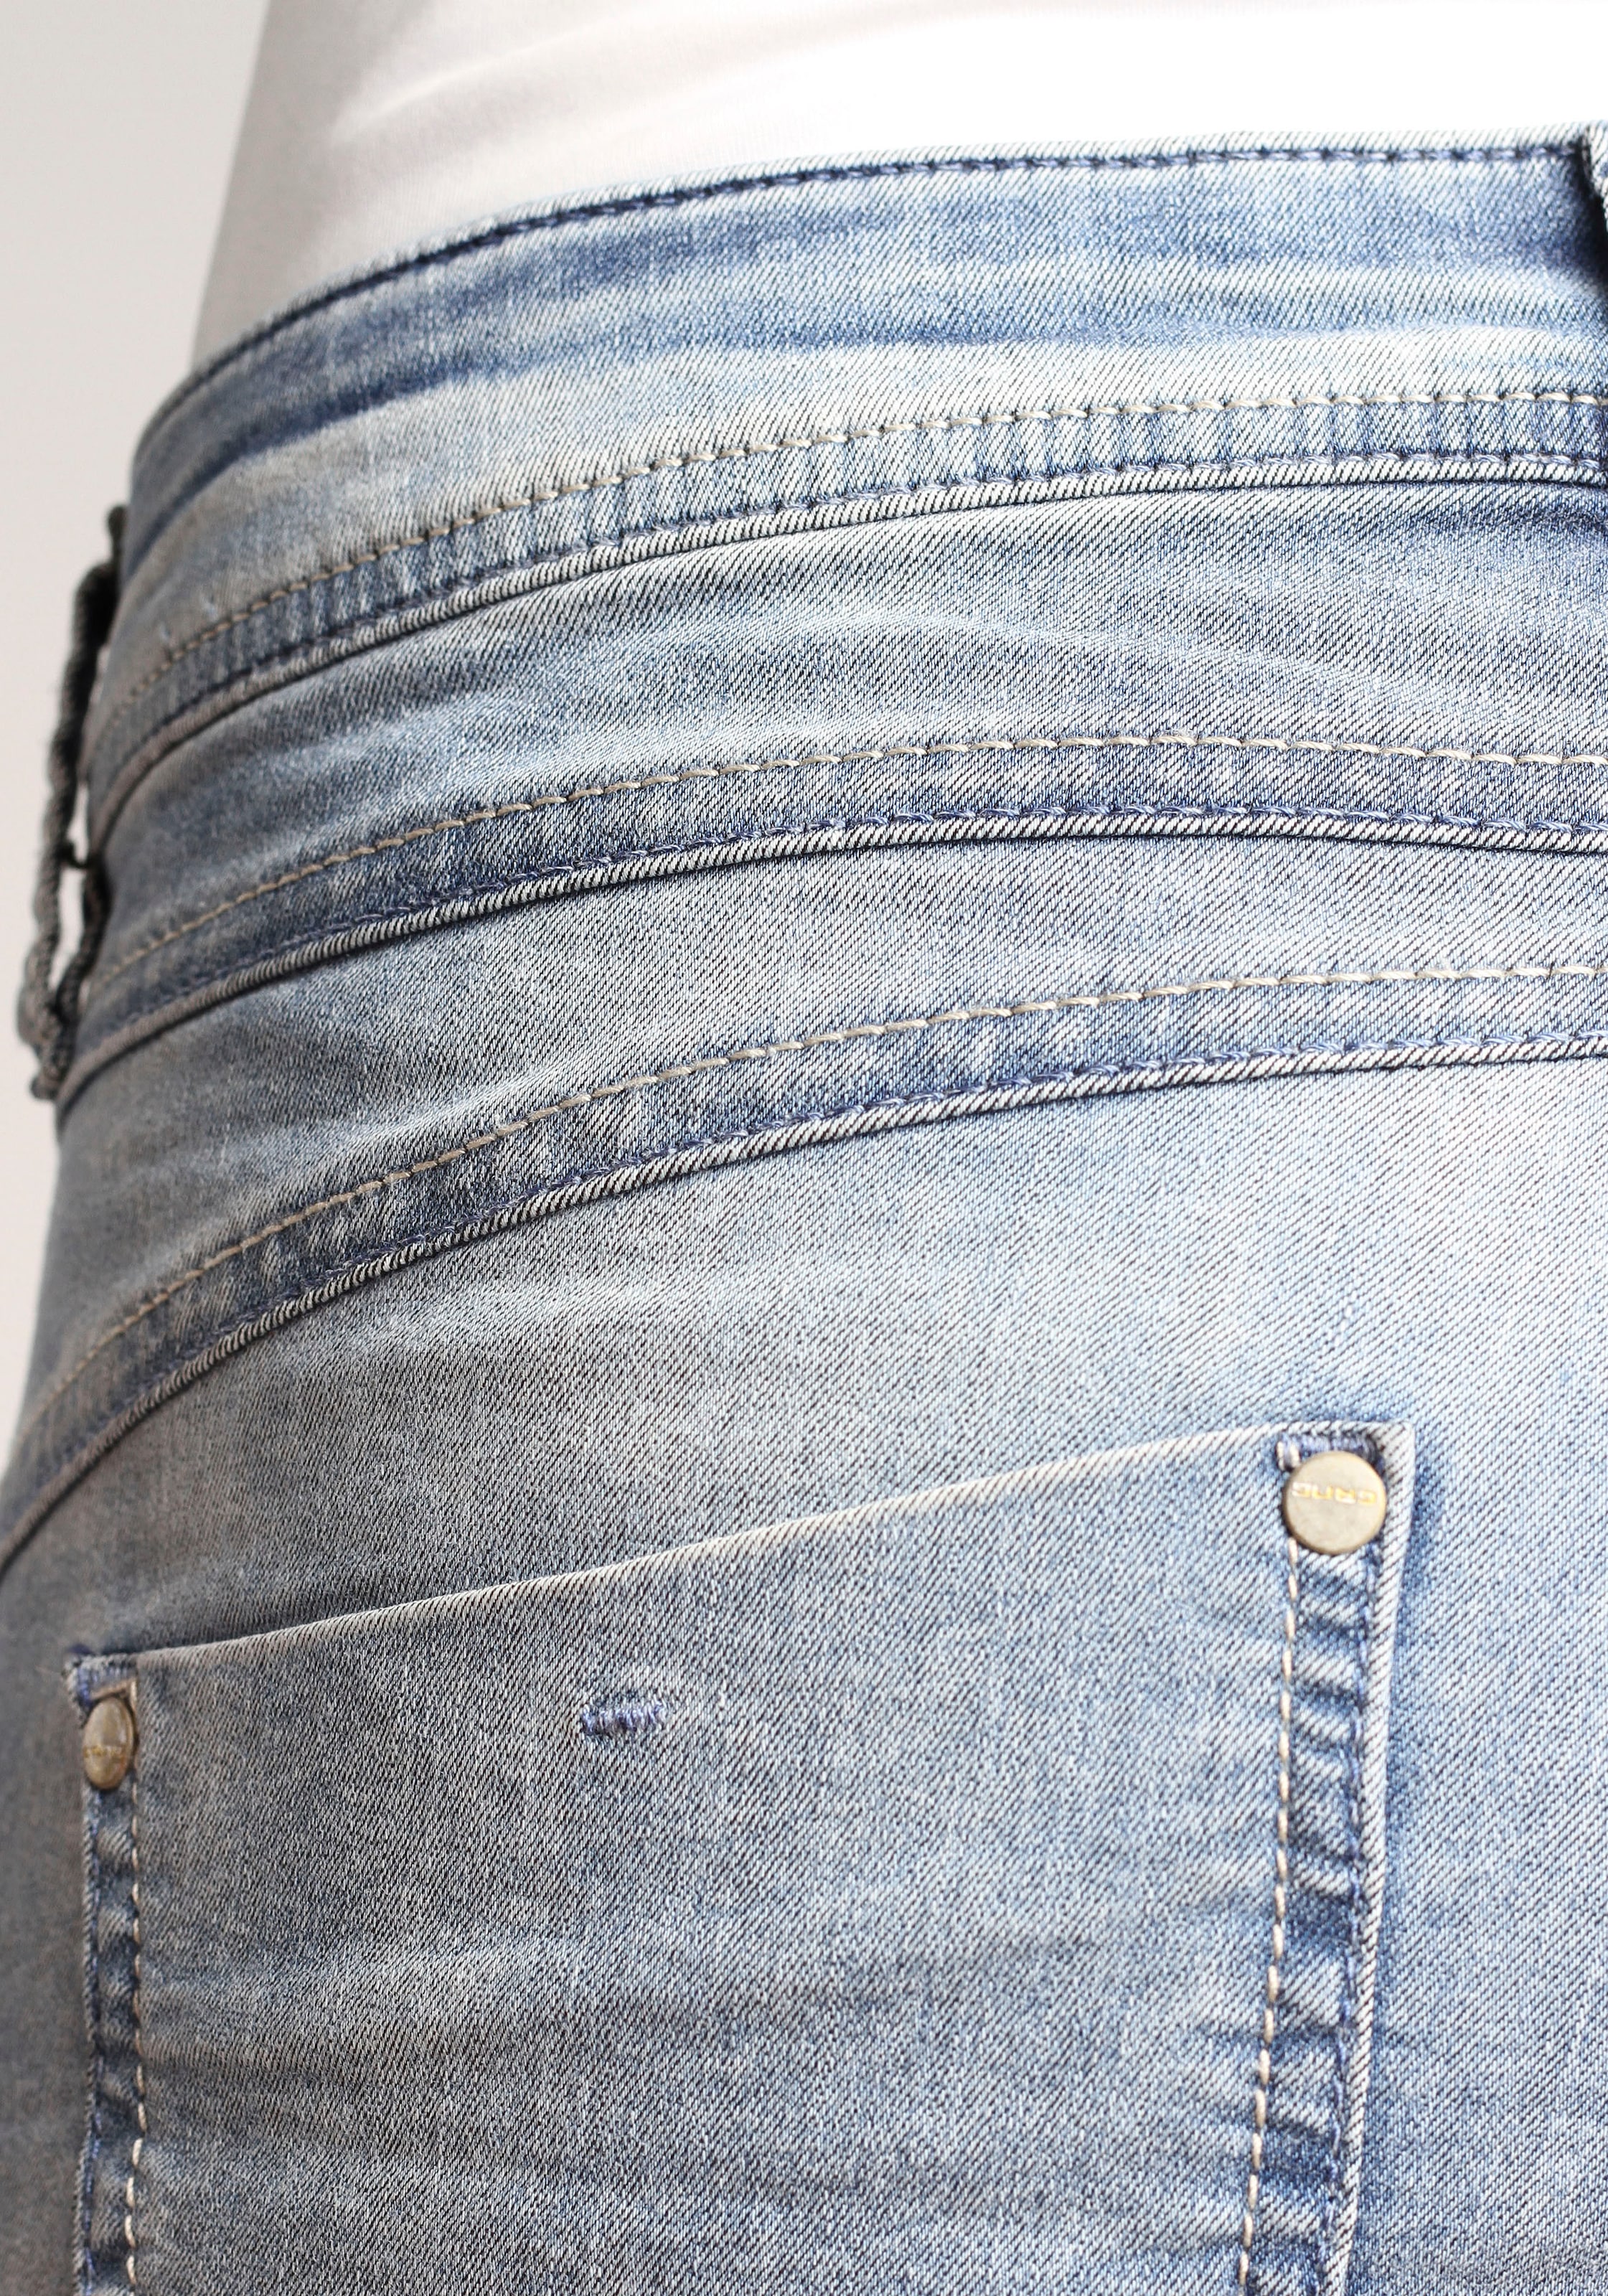 Used Relax-fit-Jeans Waschung in ♕ auf versandkostenfrei »94Amelie«, GANG cooler